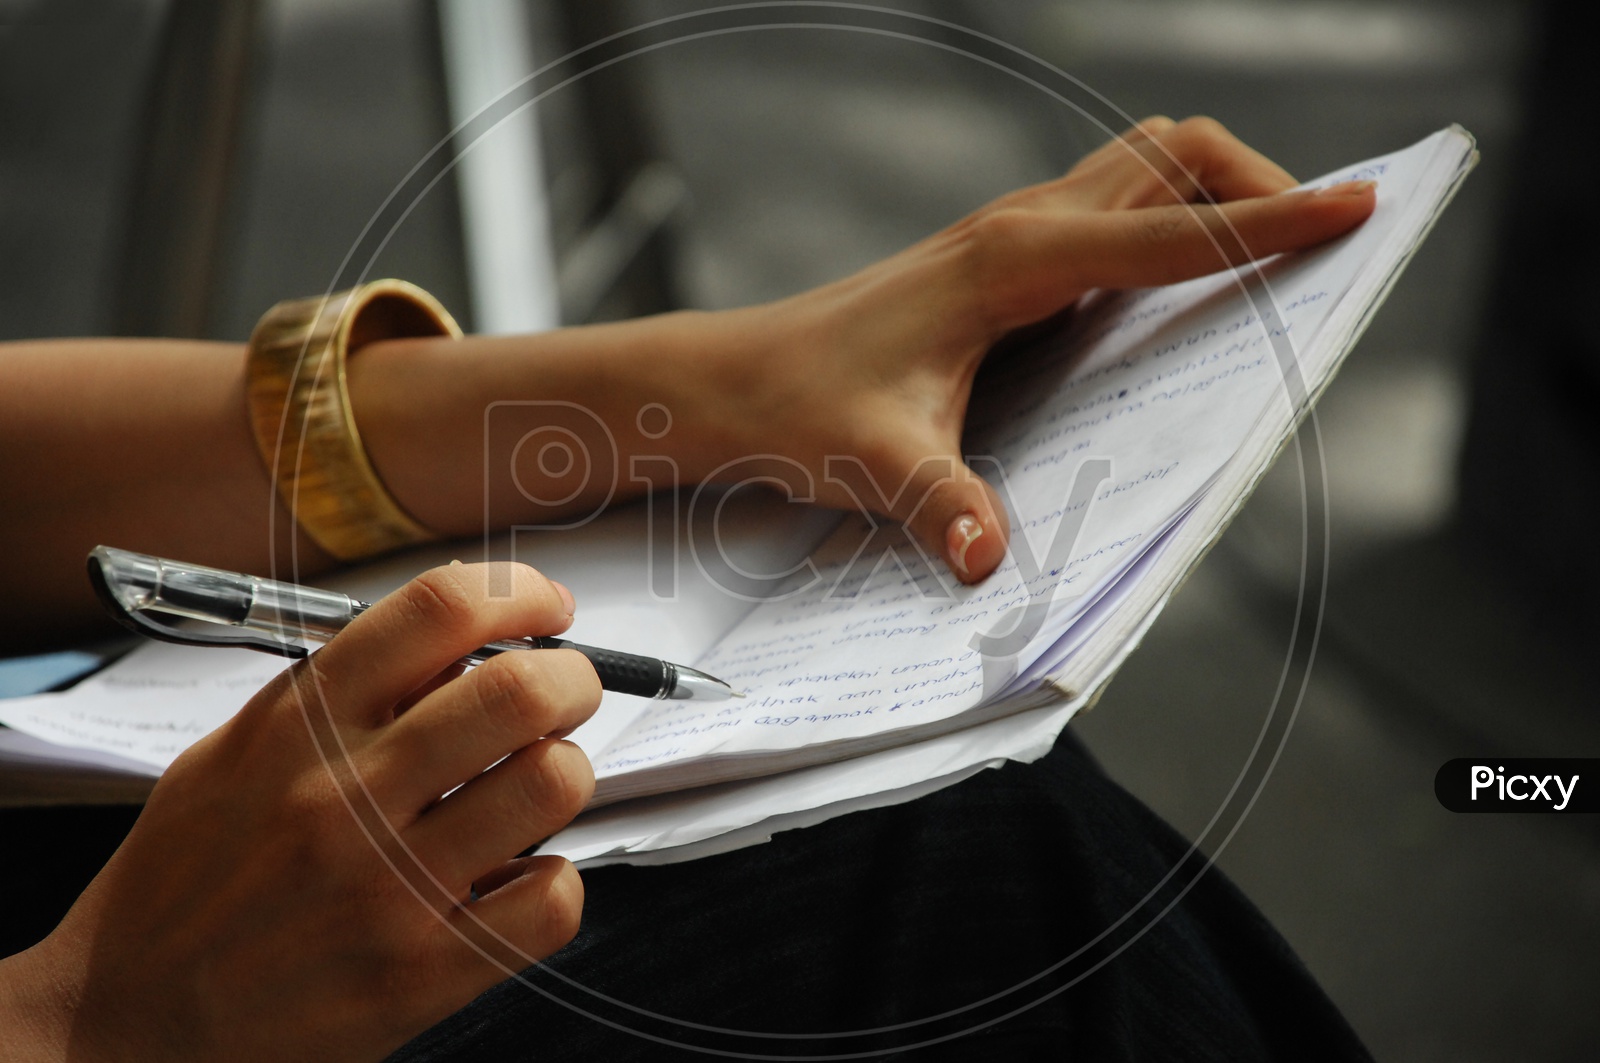 A girl writing with a pen